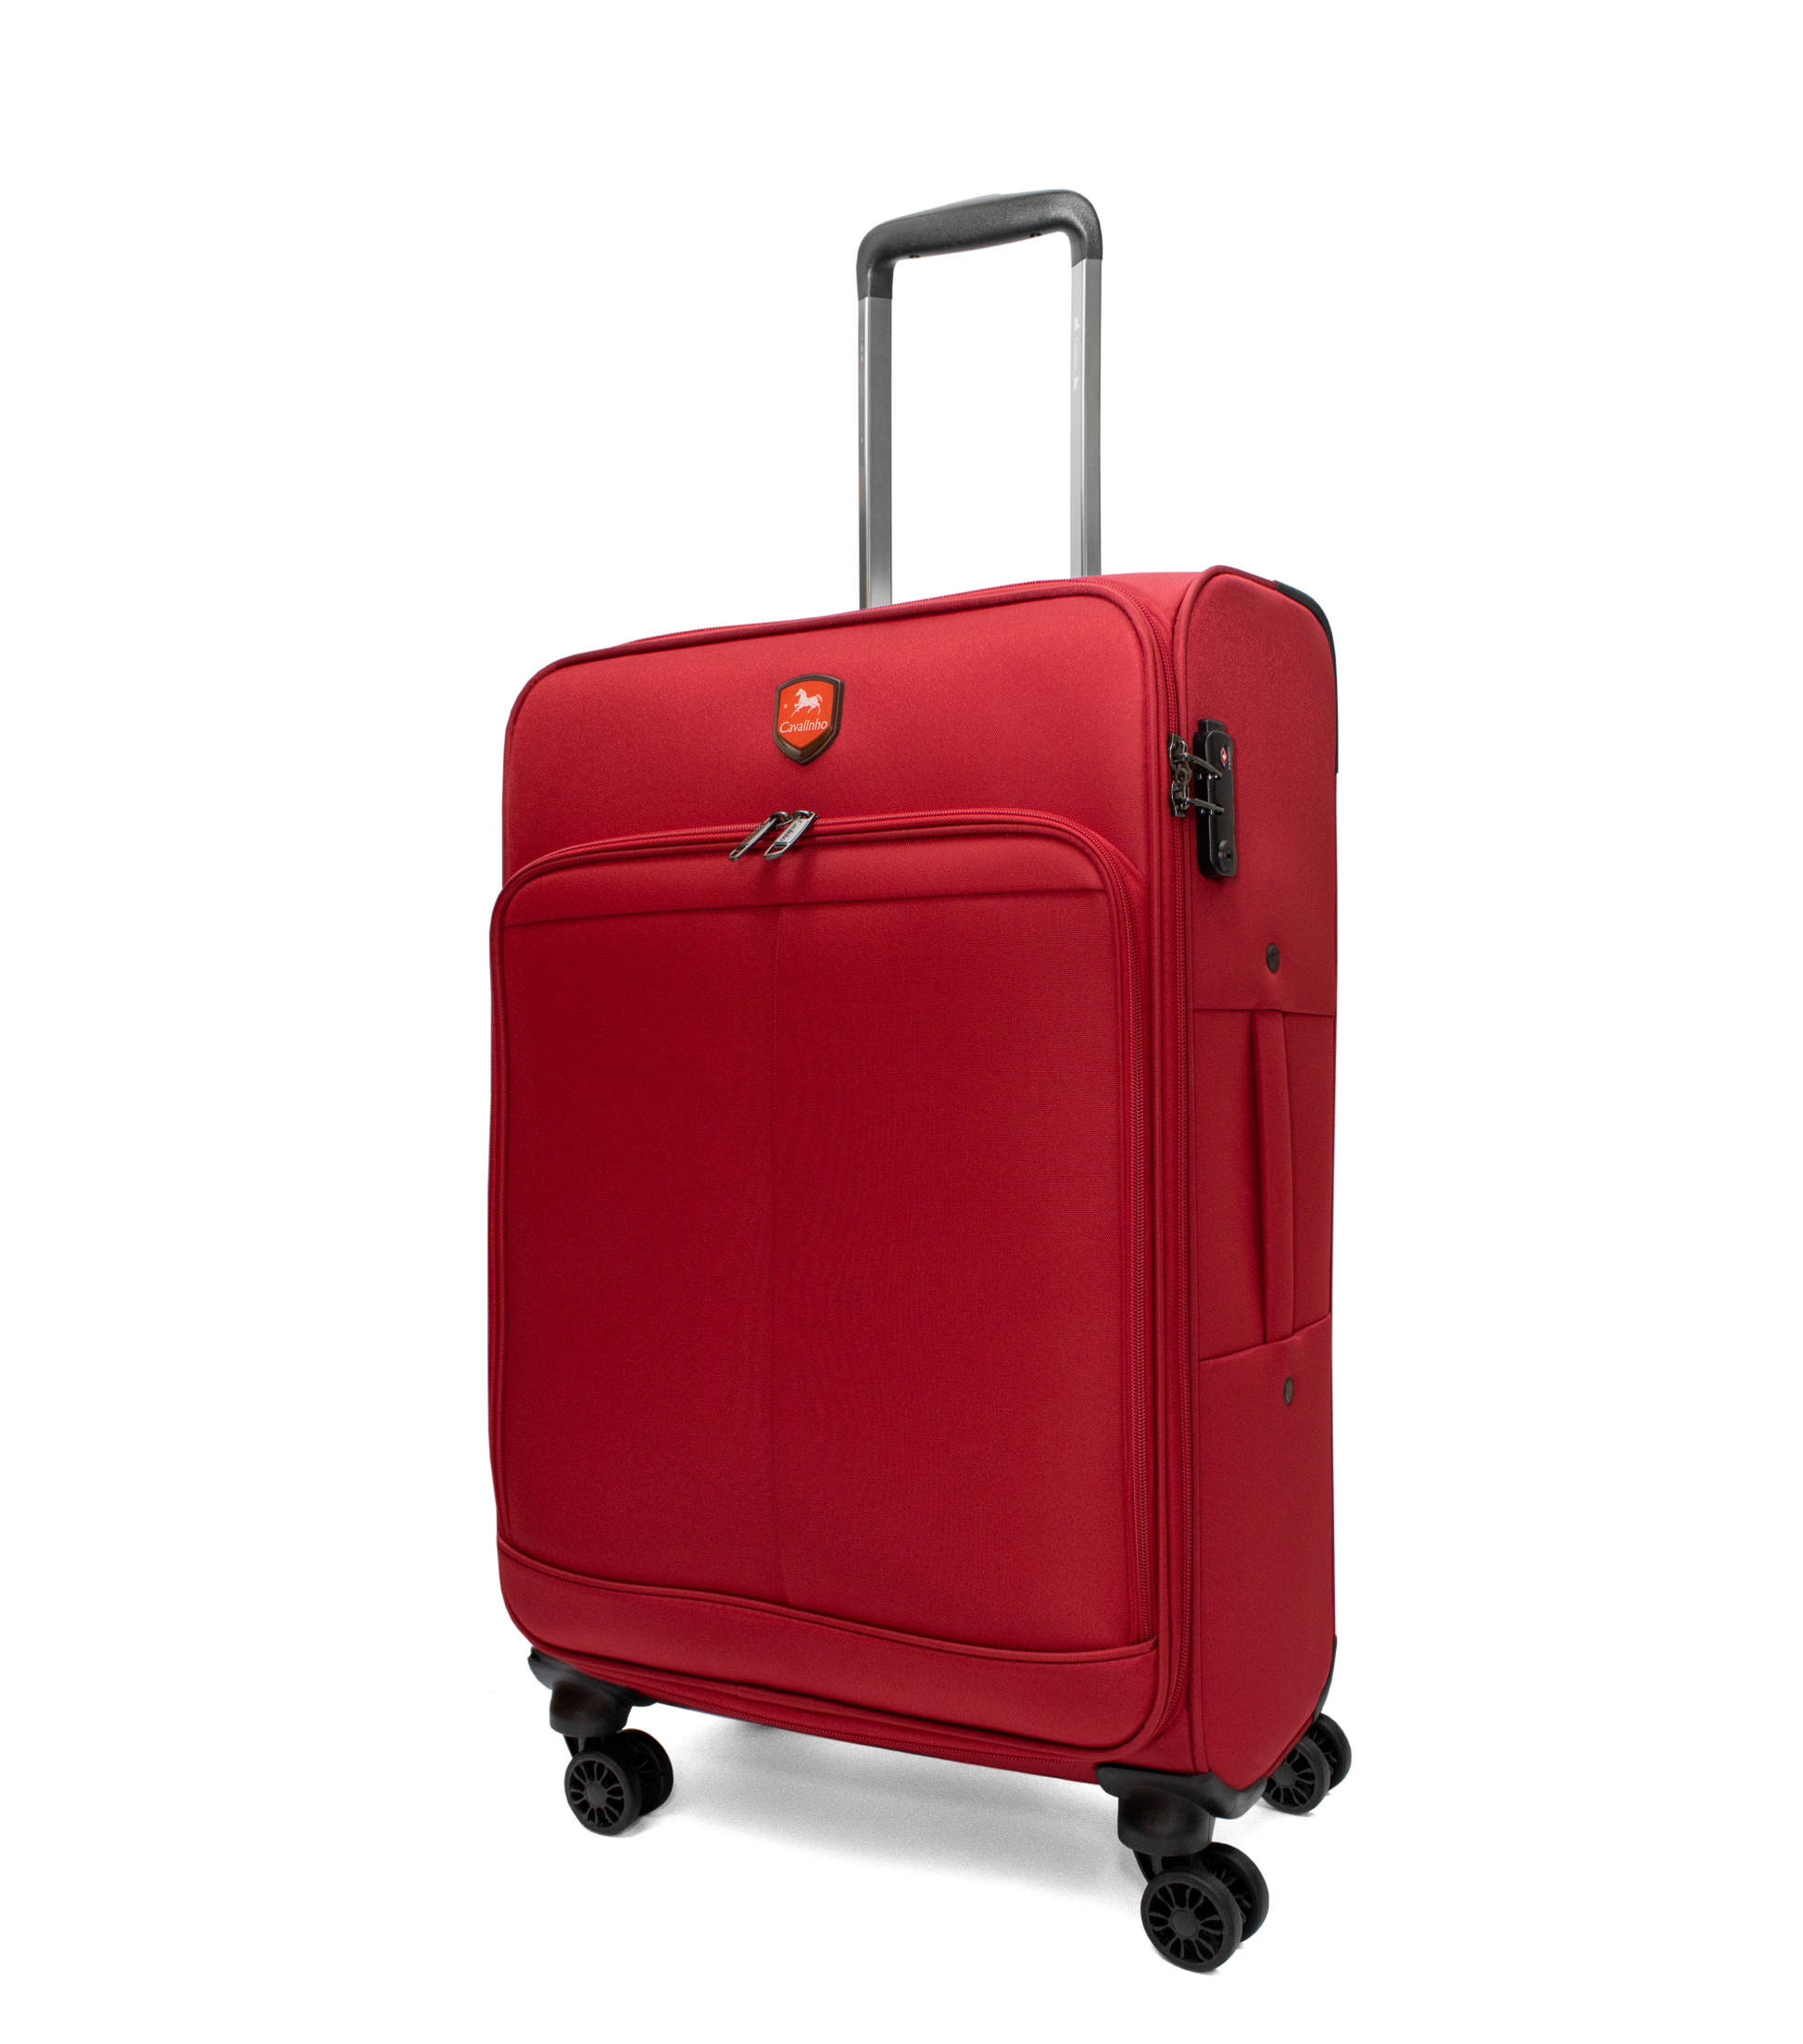 Cavalinho Check-in Softside Luggage (24" or 28") - 24 inch Red - 68020003.04.24_2